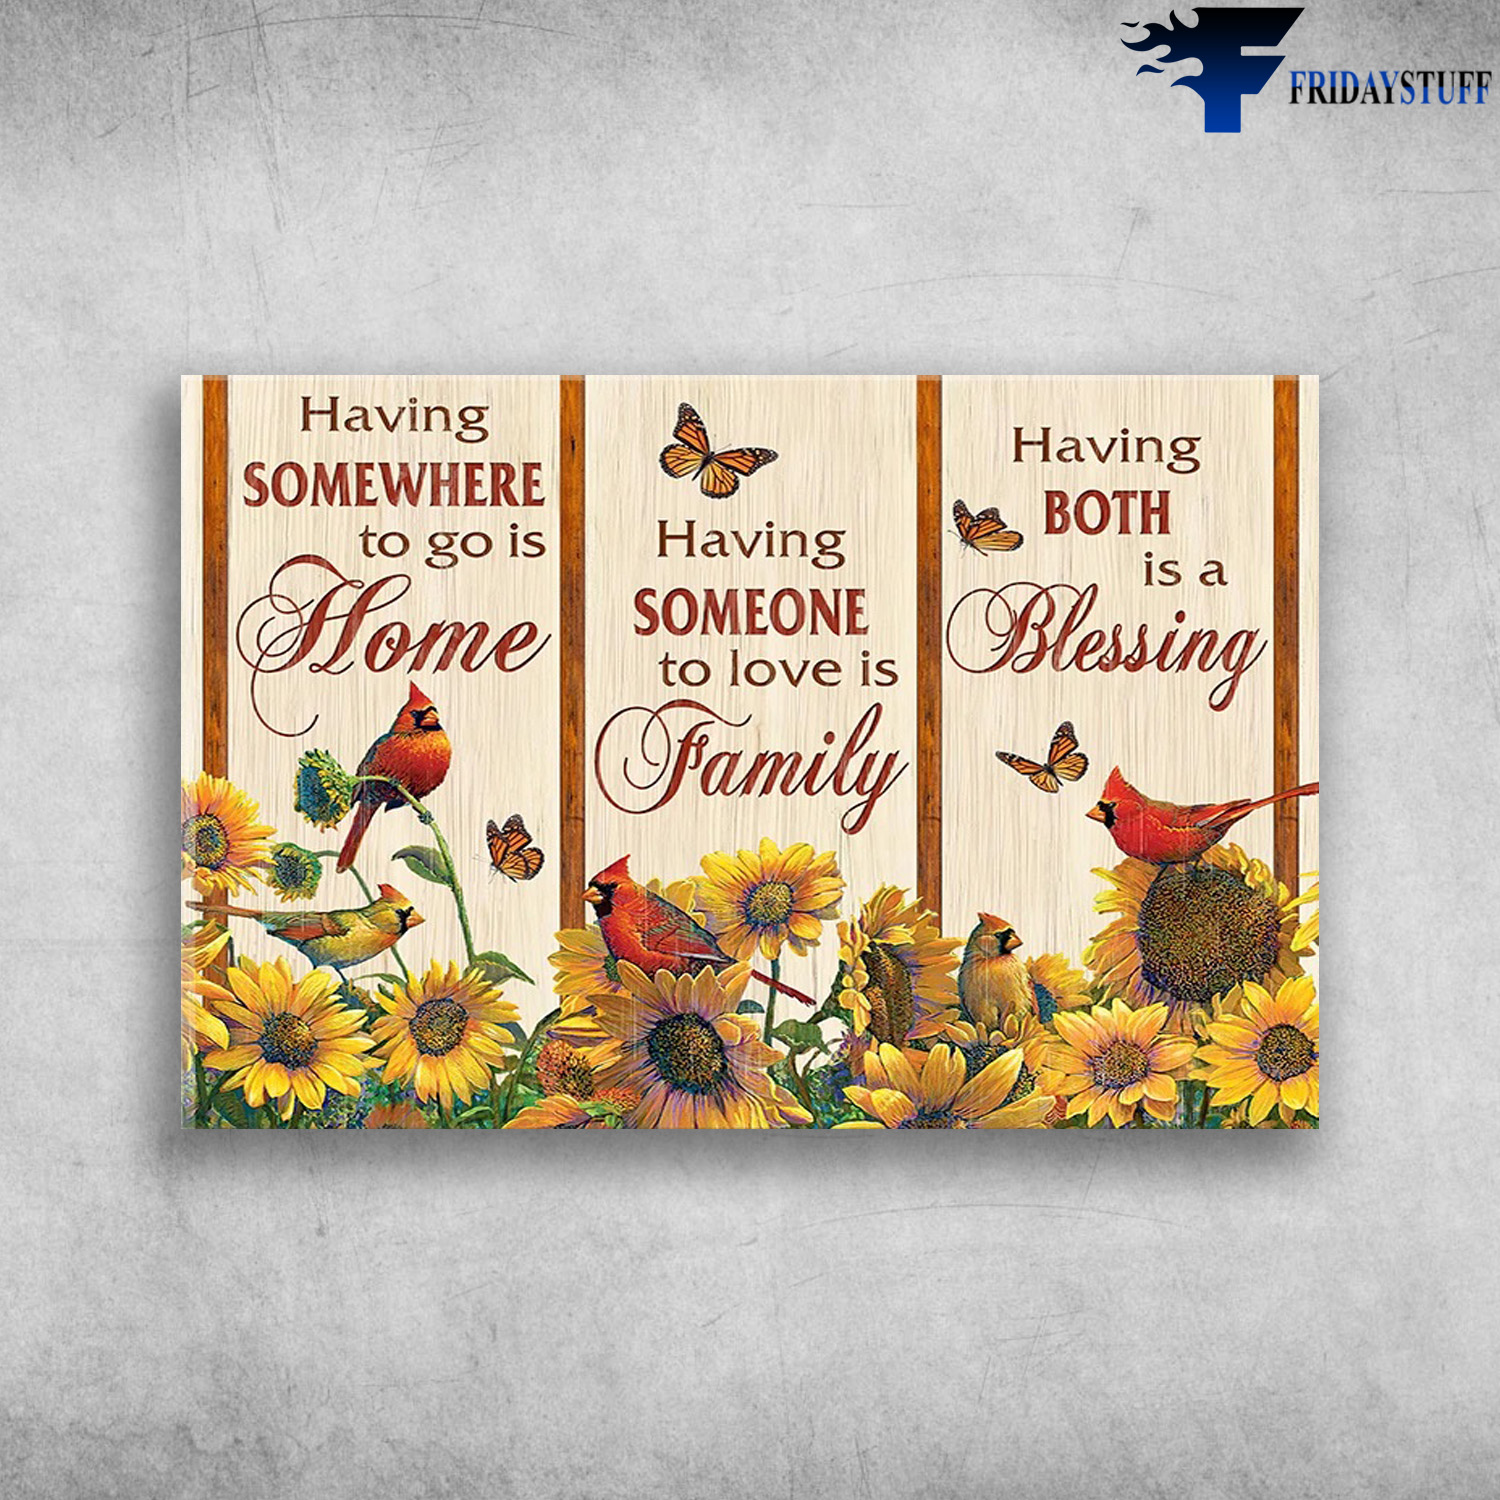 Cardianal Bird, Butterfly And Sunflower - Having Somewhere To Go Is Home, Having Someone To Love Is Family, Having Both Is A Blessing